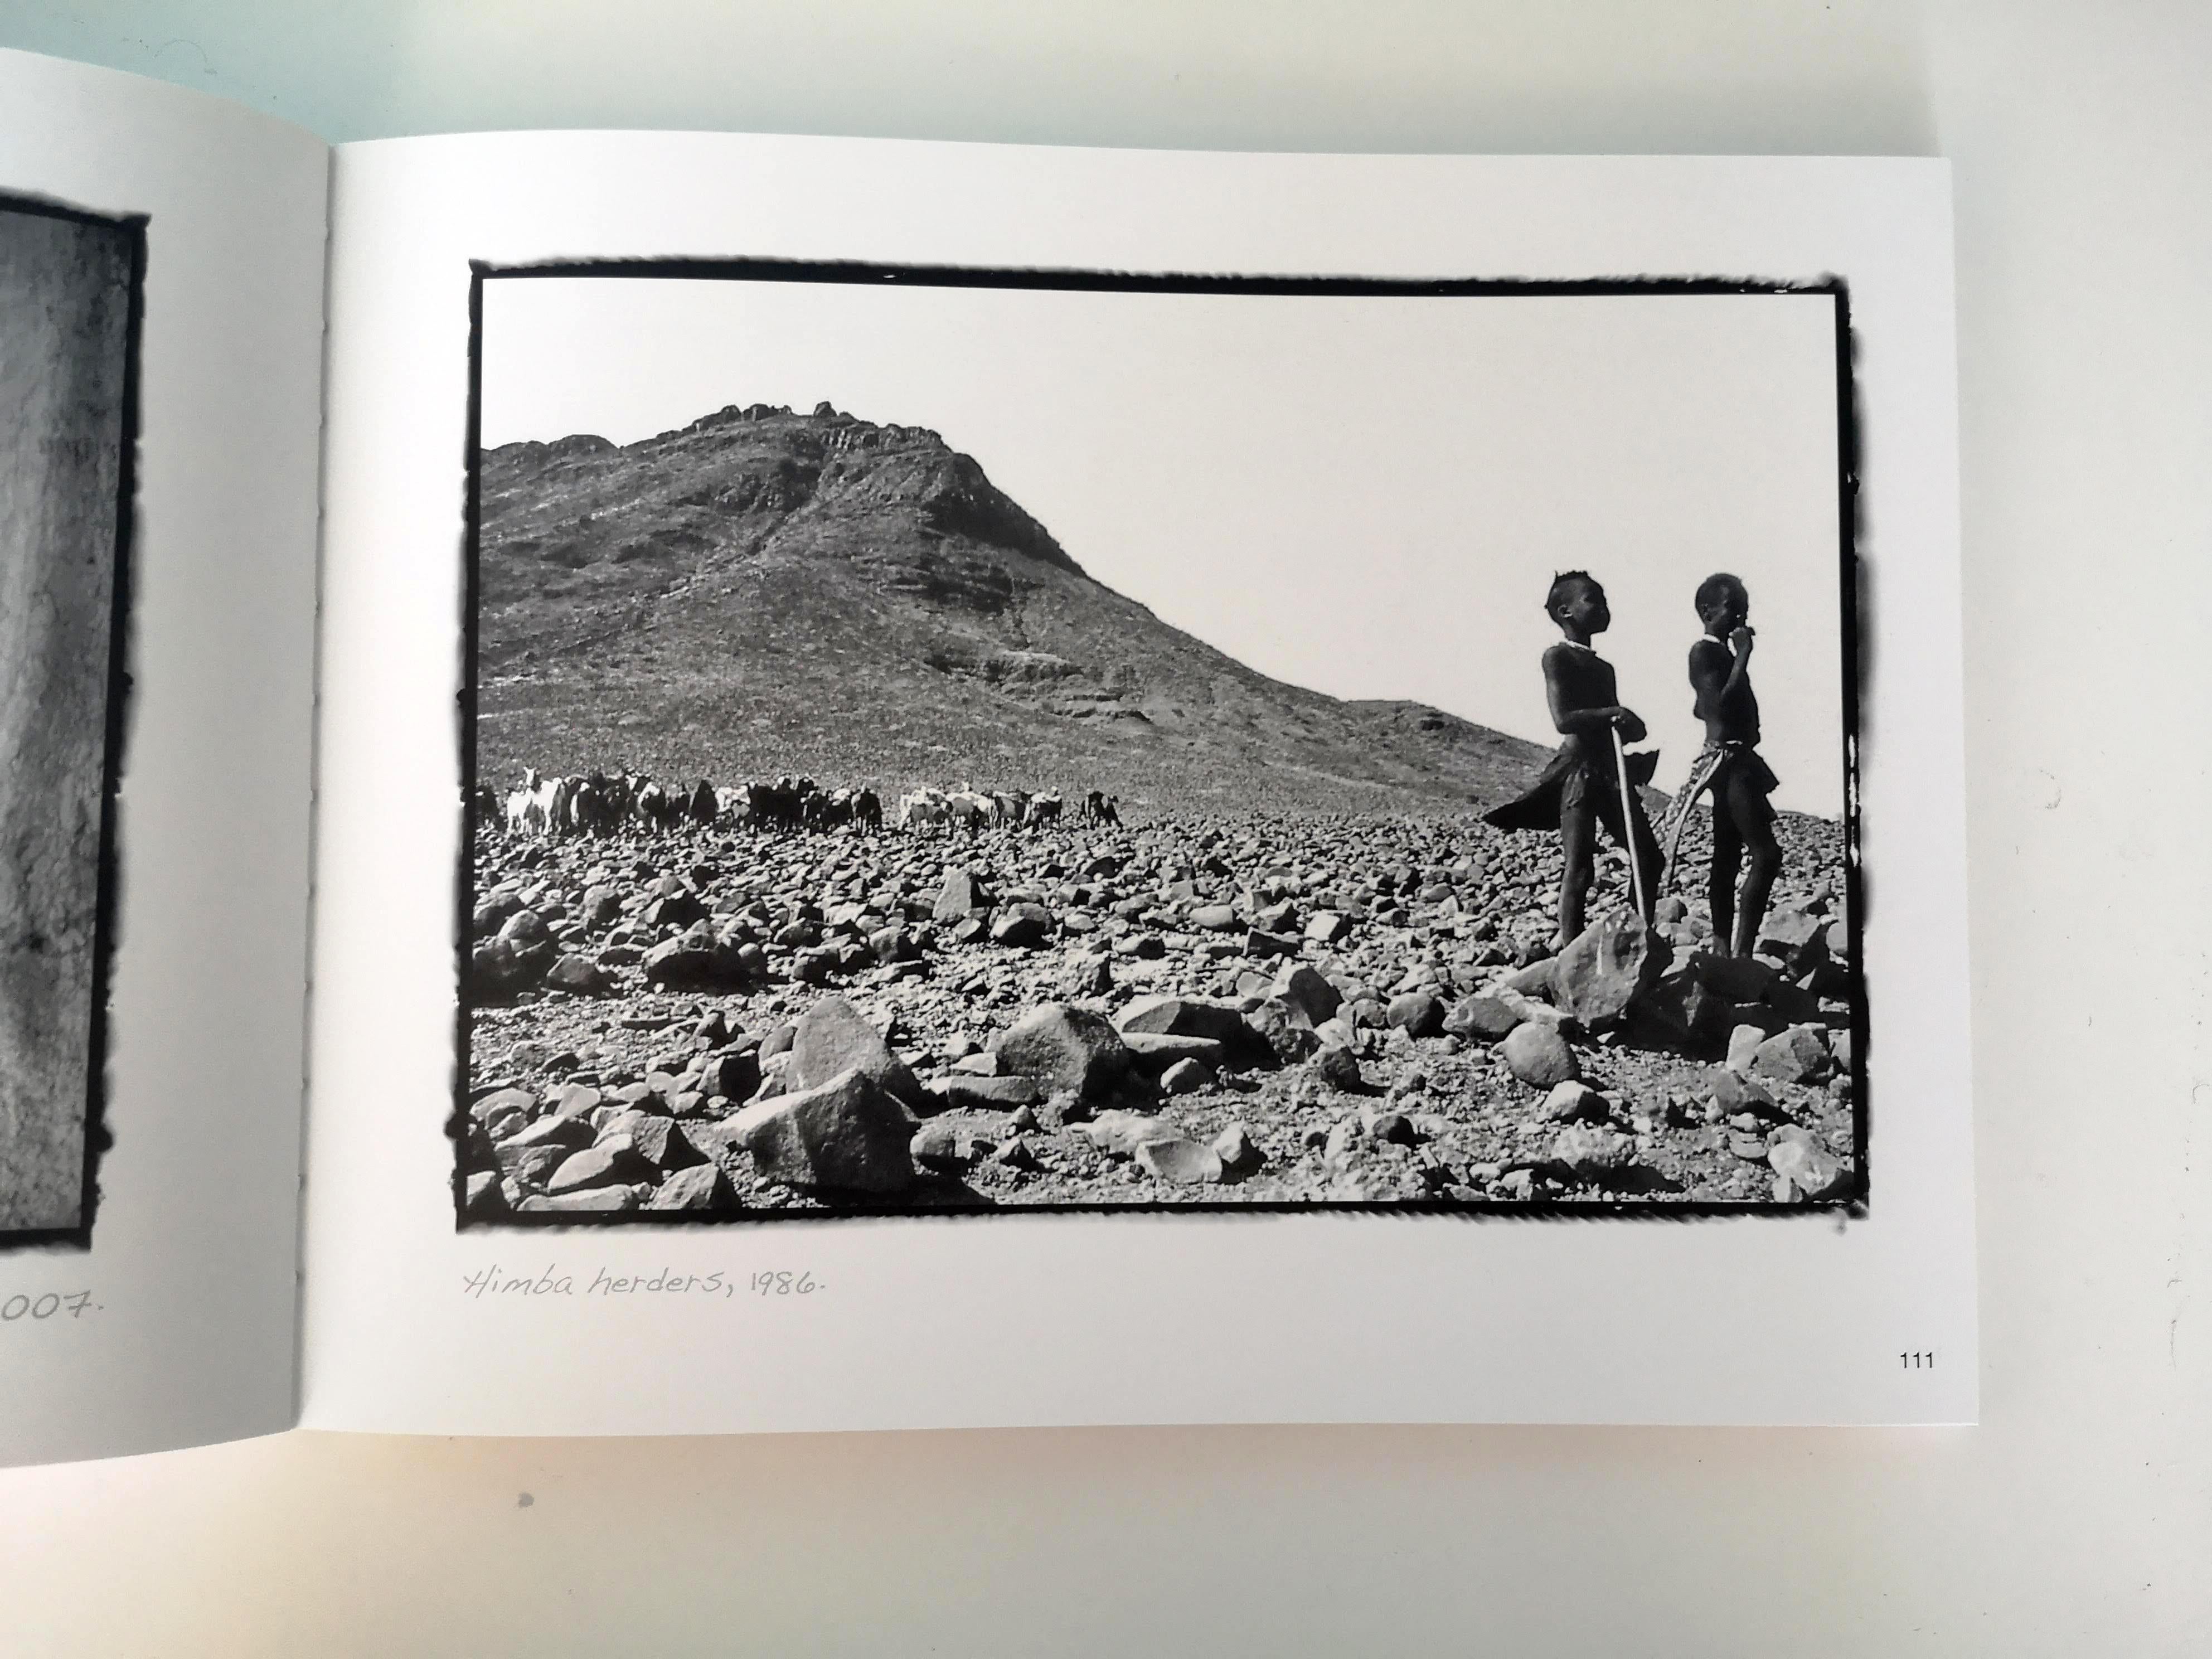 ‘The Colour of Black & White’ photobook, 2007

Tony Figueira (1959 – 2017)Tony Figueira was born in 1959 in Huambo, Angola. At the age of seven his family moved to Windhoek, Namibia. Figueira’s passion for photography was first inspired at age 16